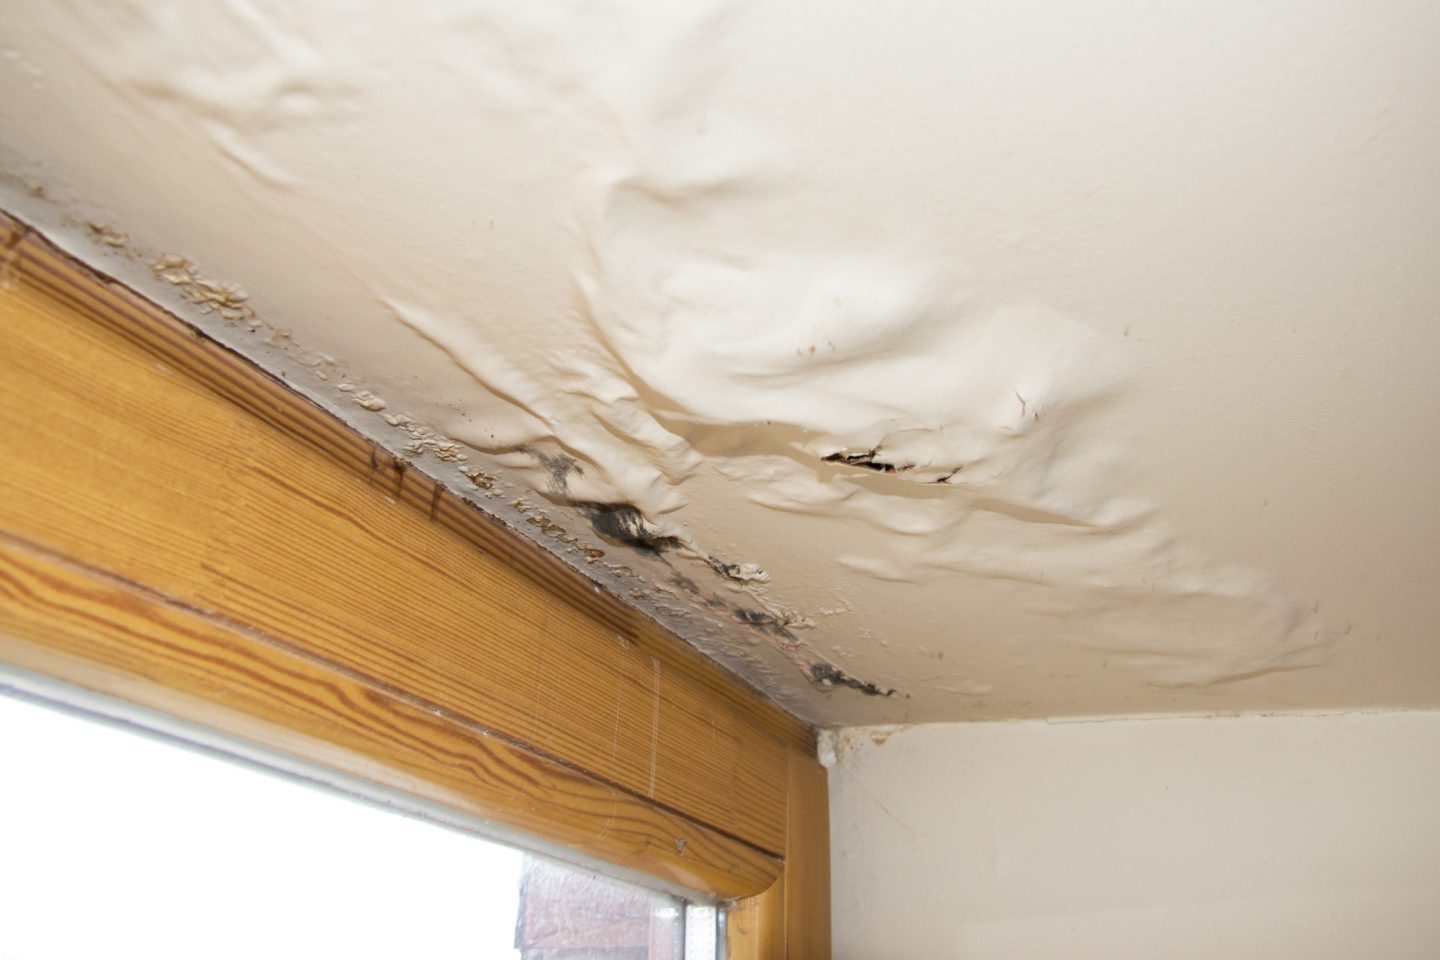 What to Expect From the Water Damage Restoration Process